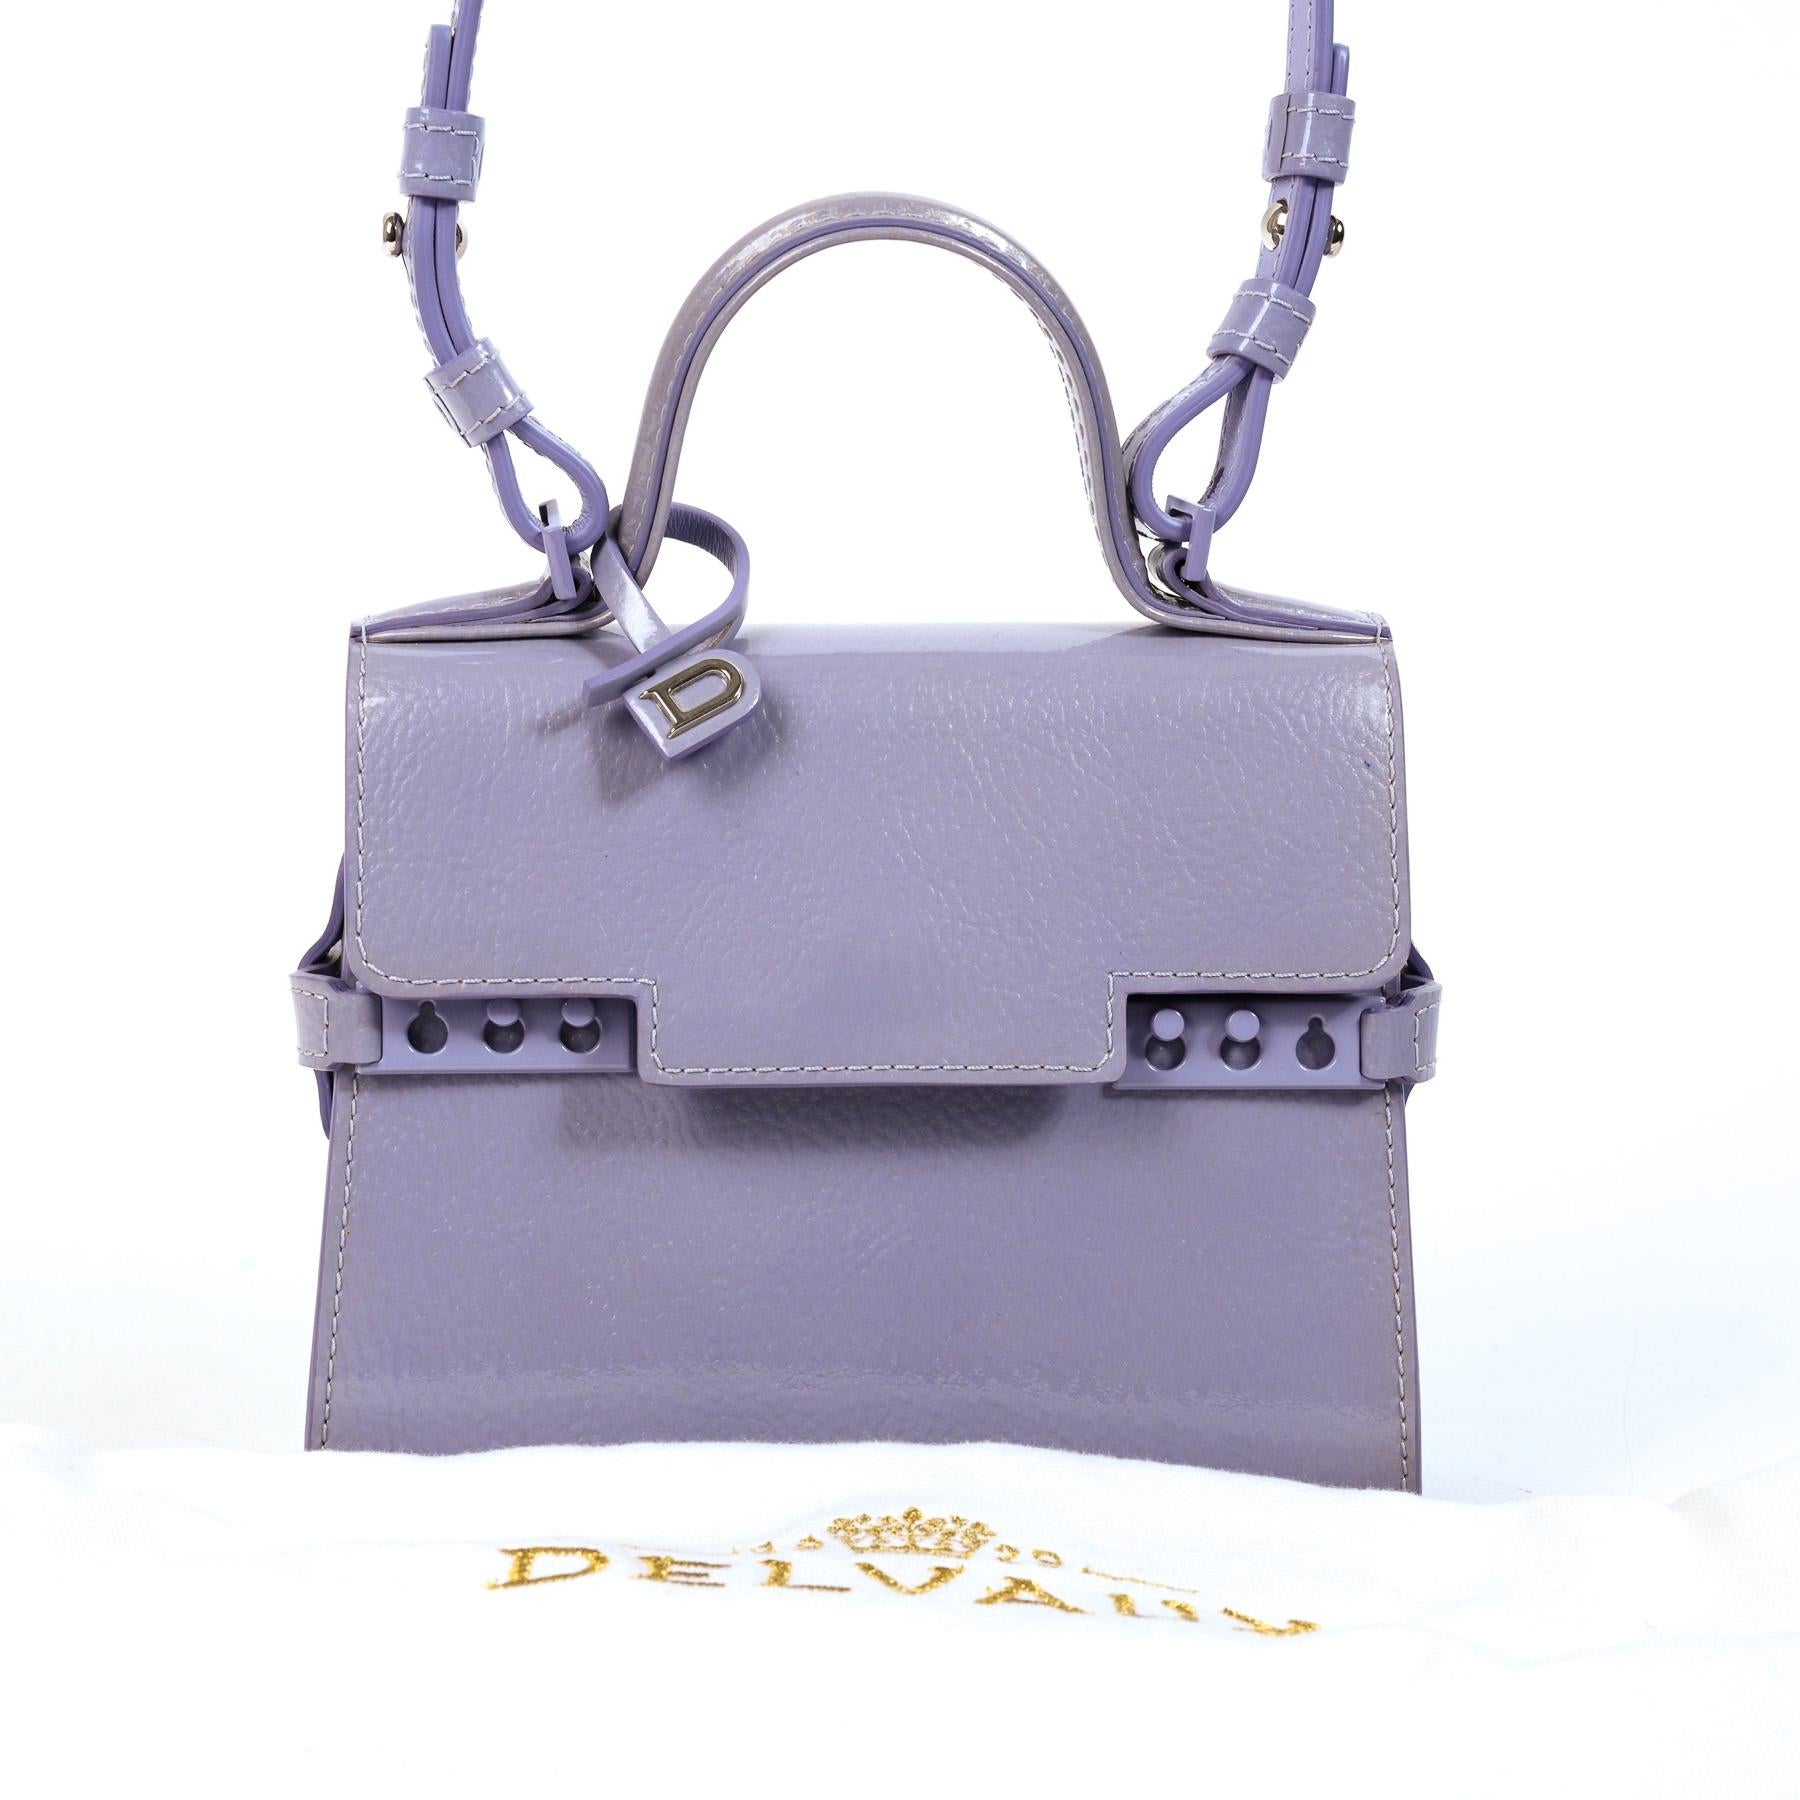 Delvaux Tempête Micro Lilac Vernis Gel

The most tiny member of the Delvaux Tempête family, the Delvaux Tempête Micro is now discontinued and highly sought after.

Made from Vernis Gel patent leather in Lilas purple, the bas has all the signature